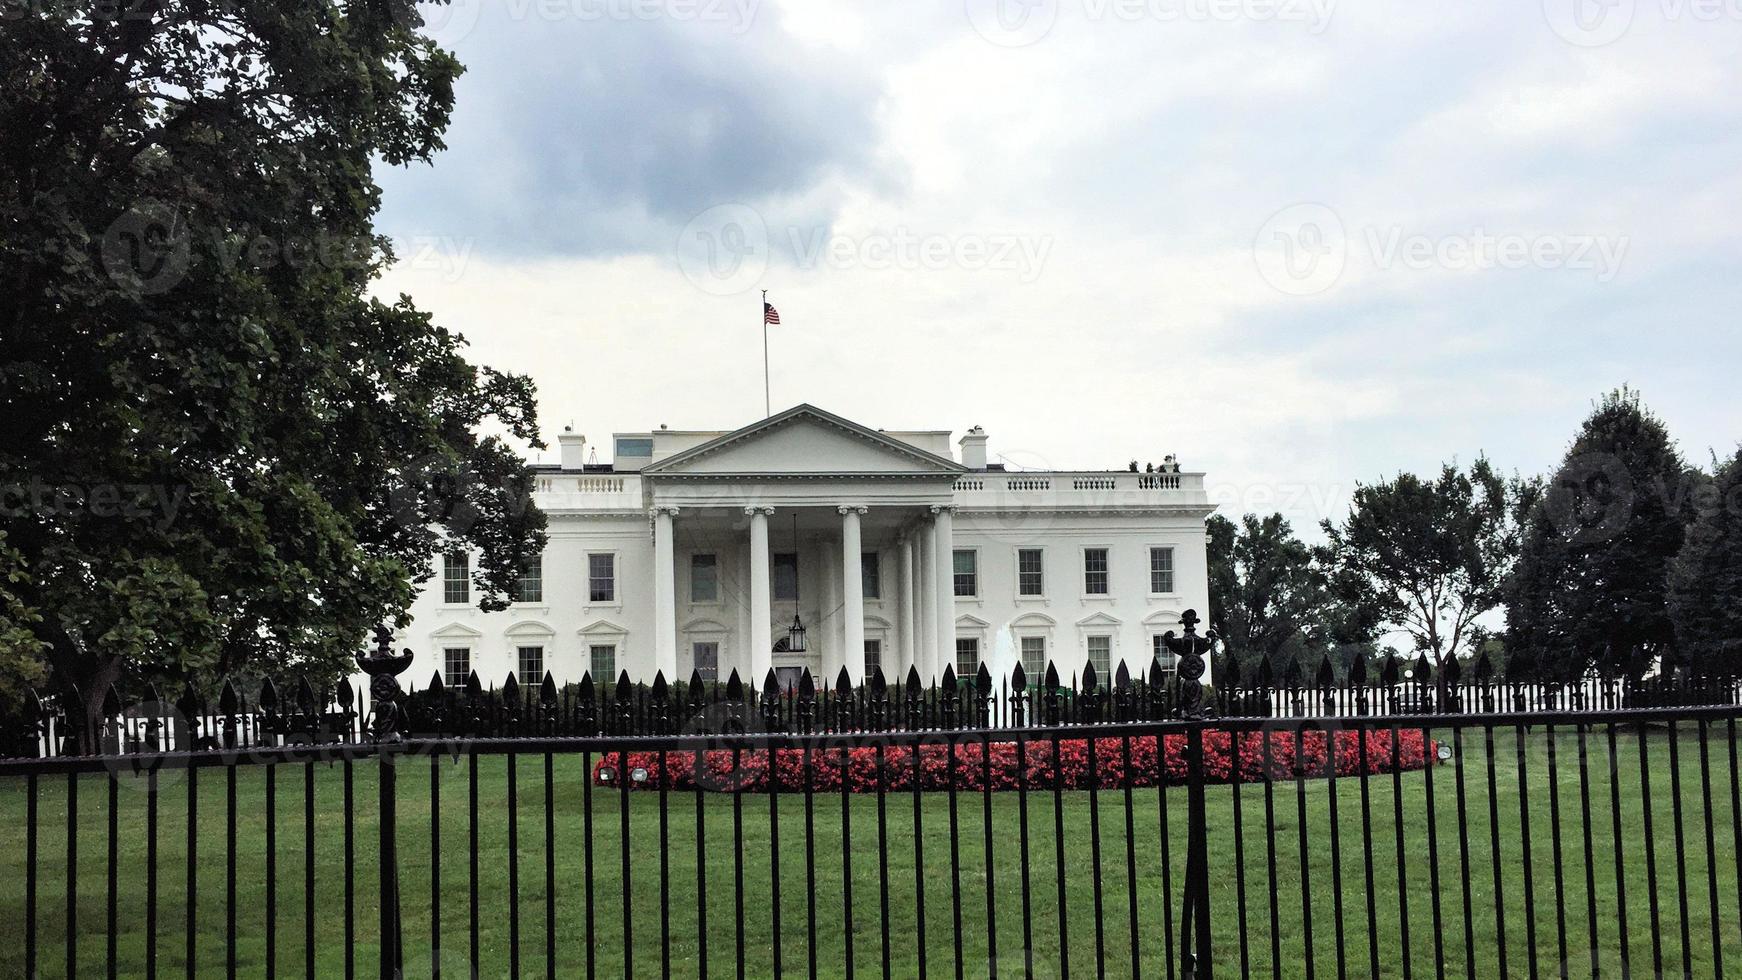 A view of the White House in Washington DC photo